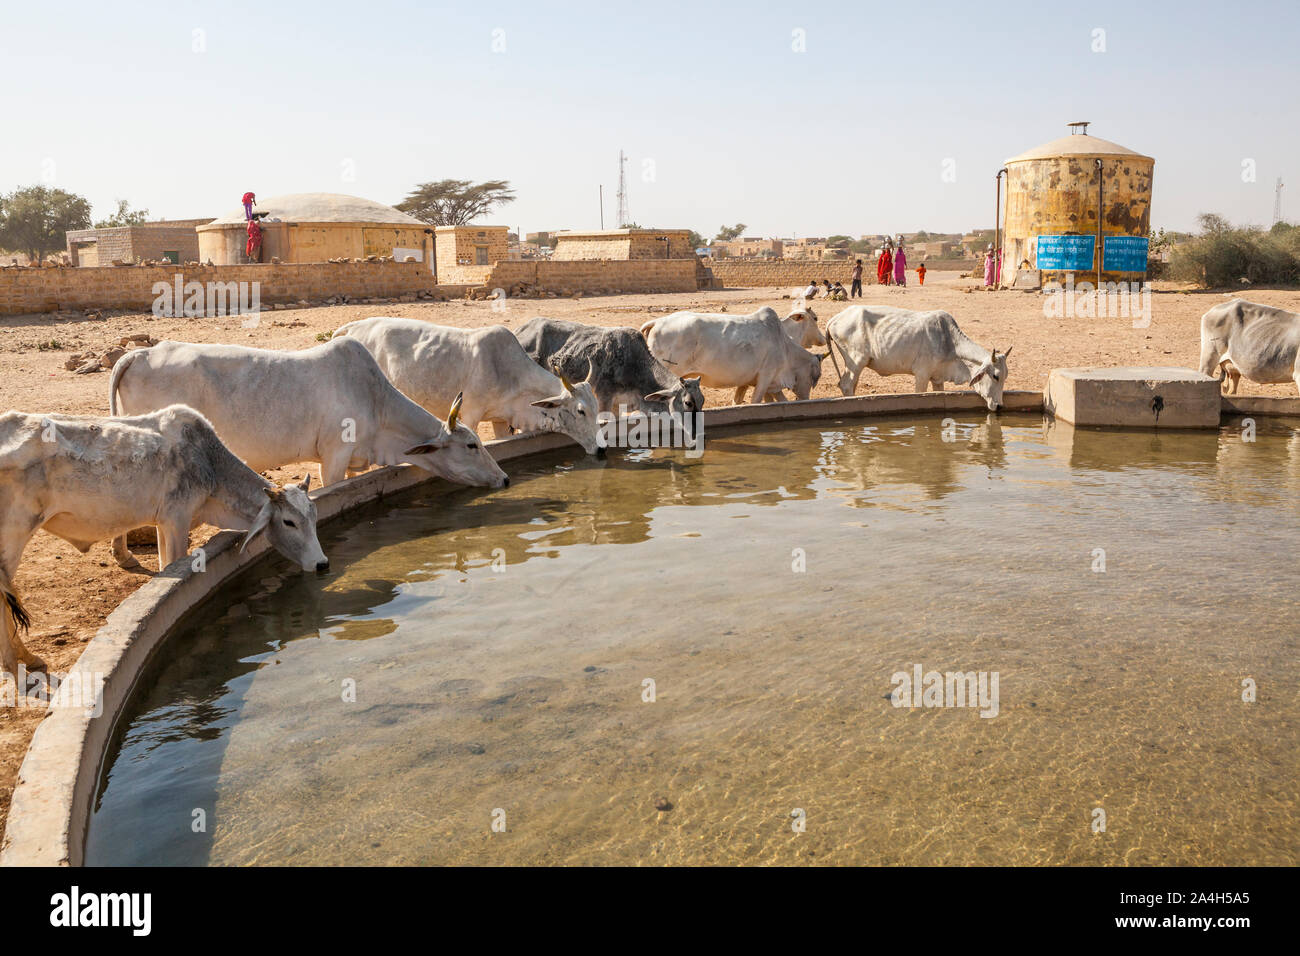 Cows take in some water at a small village (Kanoi) in the Thar Desert of Western Rajasthan, India. Stock Photo